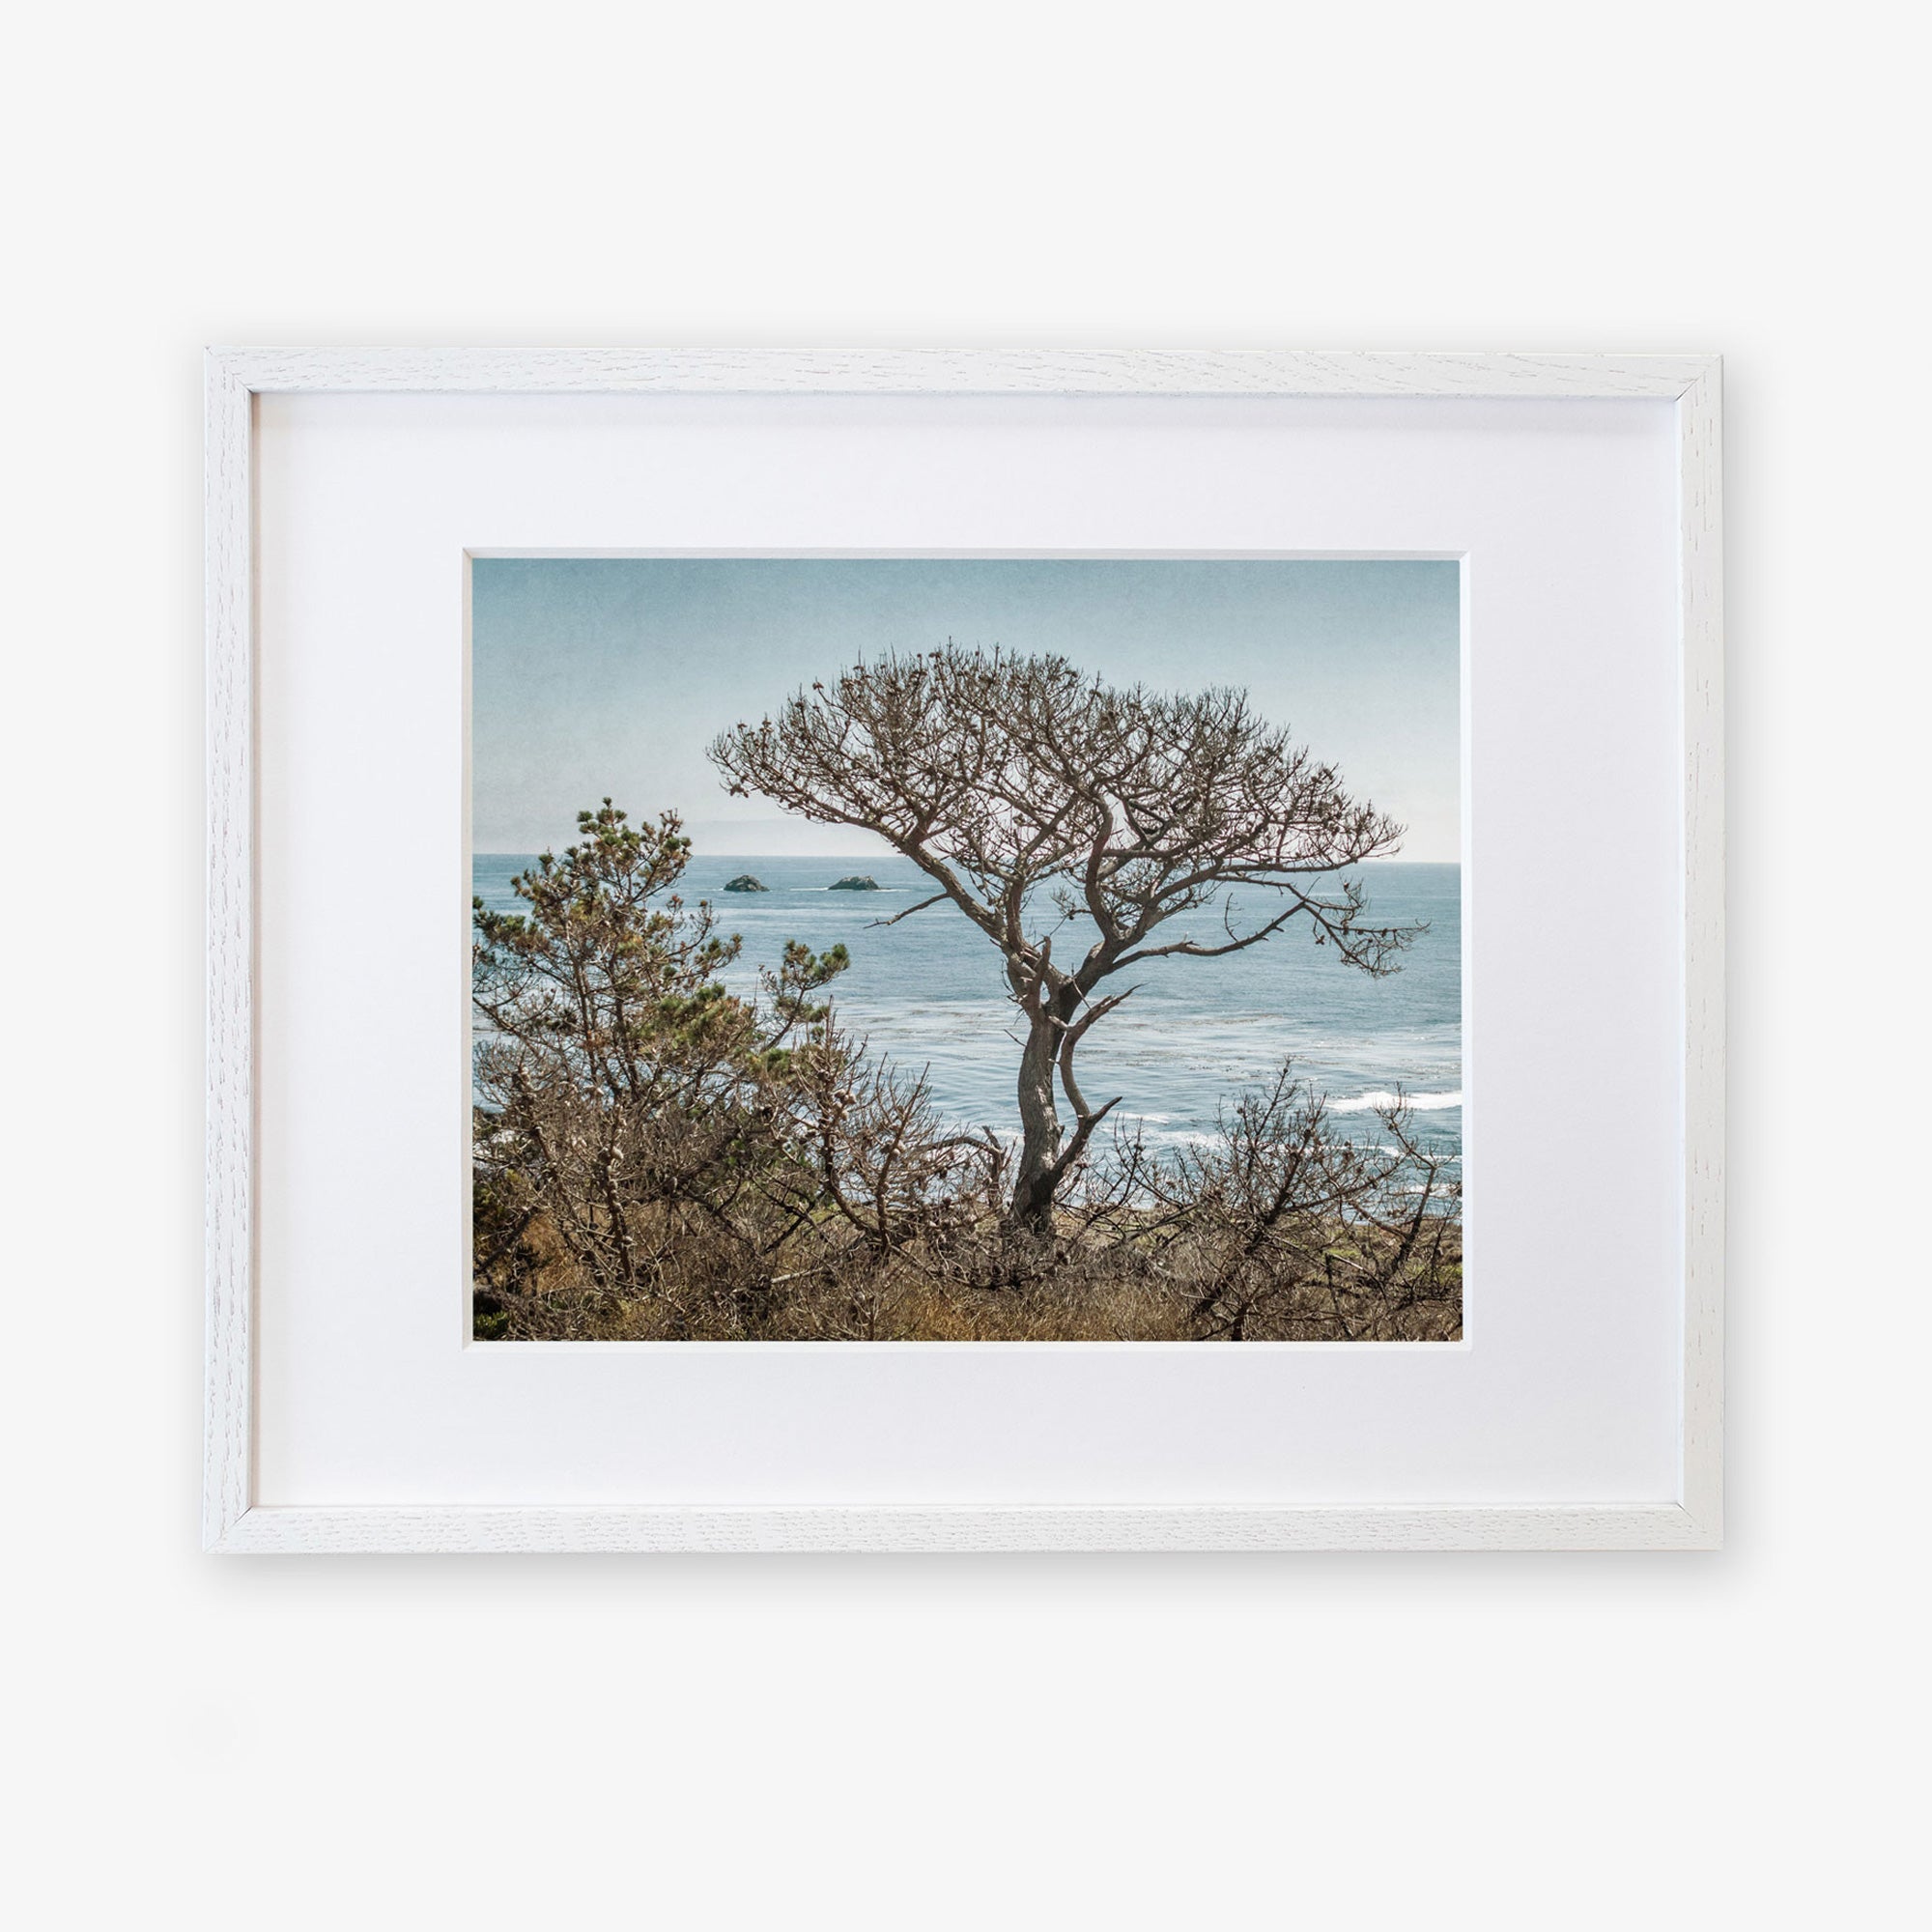 A framed artwork of Offley Green&#39;s California Landscape Art in Big Sur, titled &#39;Wind Blown Tree&#39;, depicting a windswept tree overlooking a calm sea with small islands in the distance, set against a light blue sky.